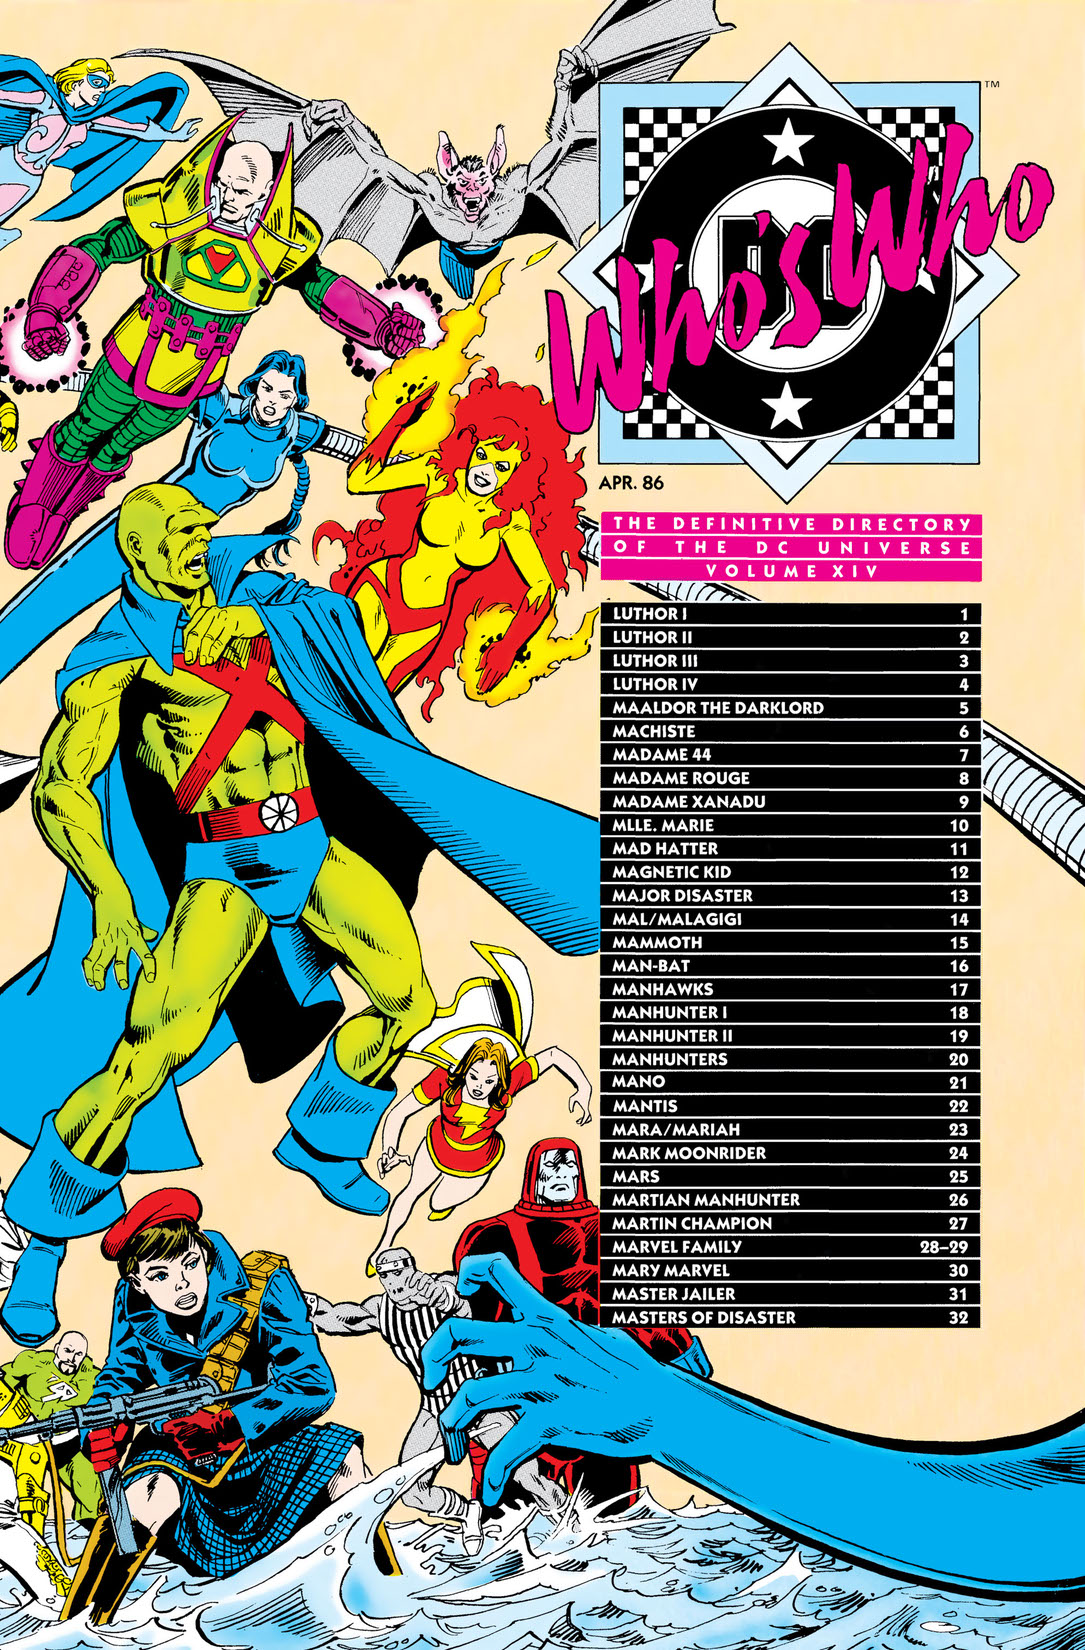 Who's Who: The Definitive Directory of the DC Universe #14 preview images